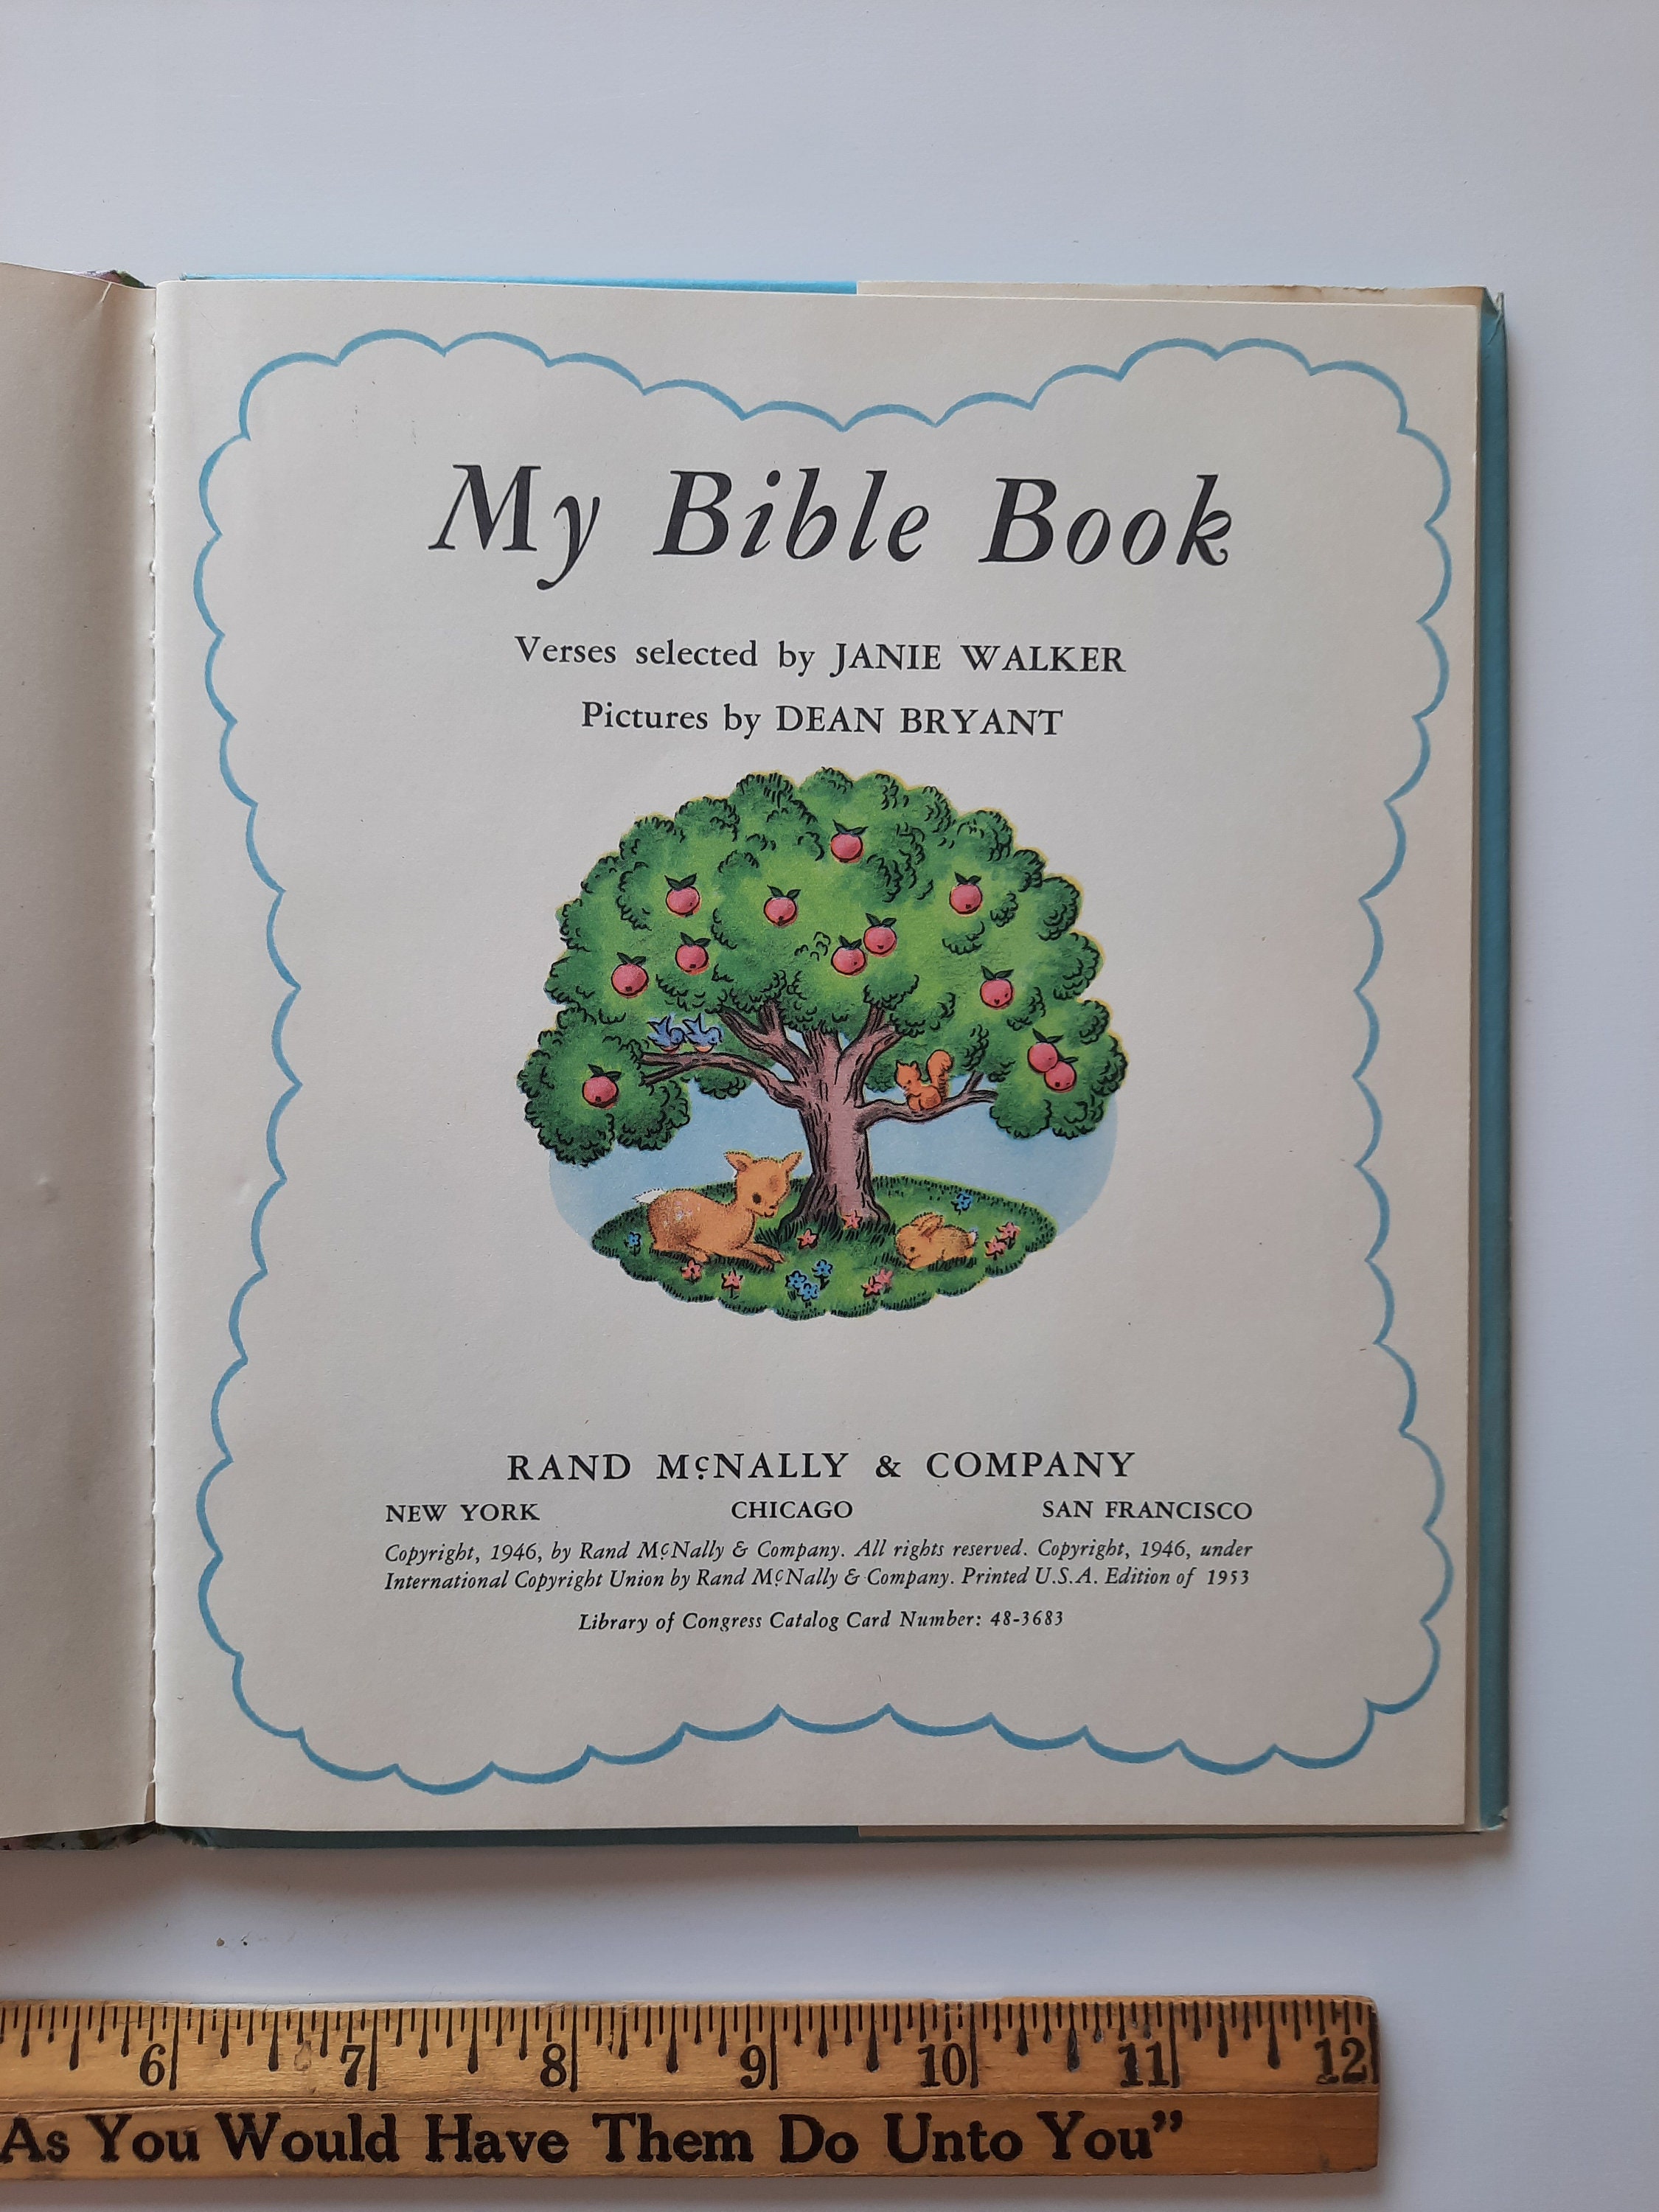 1953 Children's Story Book: my Bible Book by Janie Walker